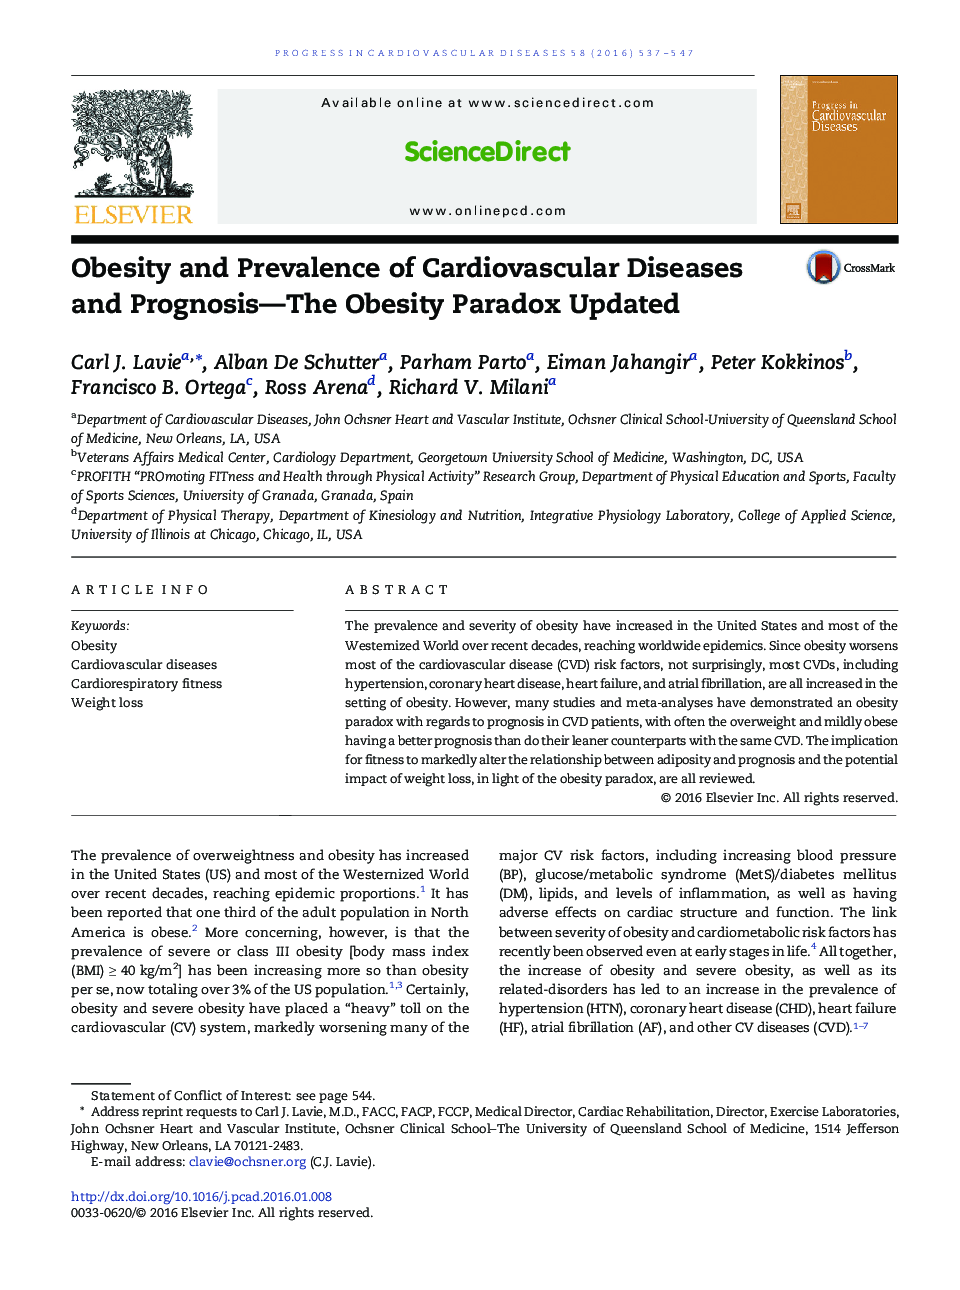 Obesity and Prevalence of Cardiovascular Diseases and Prognosis—The Obesity Paradox Updated 